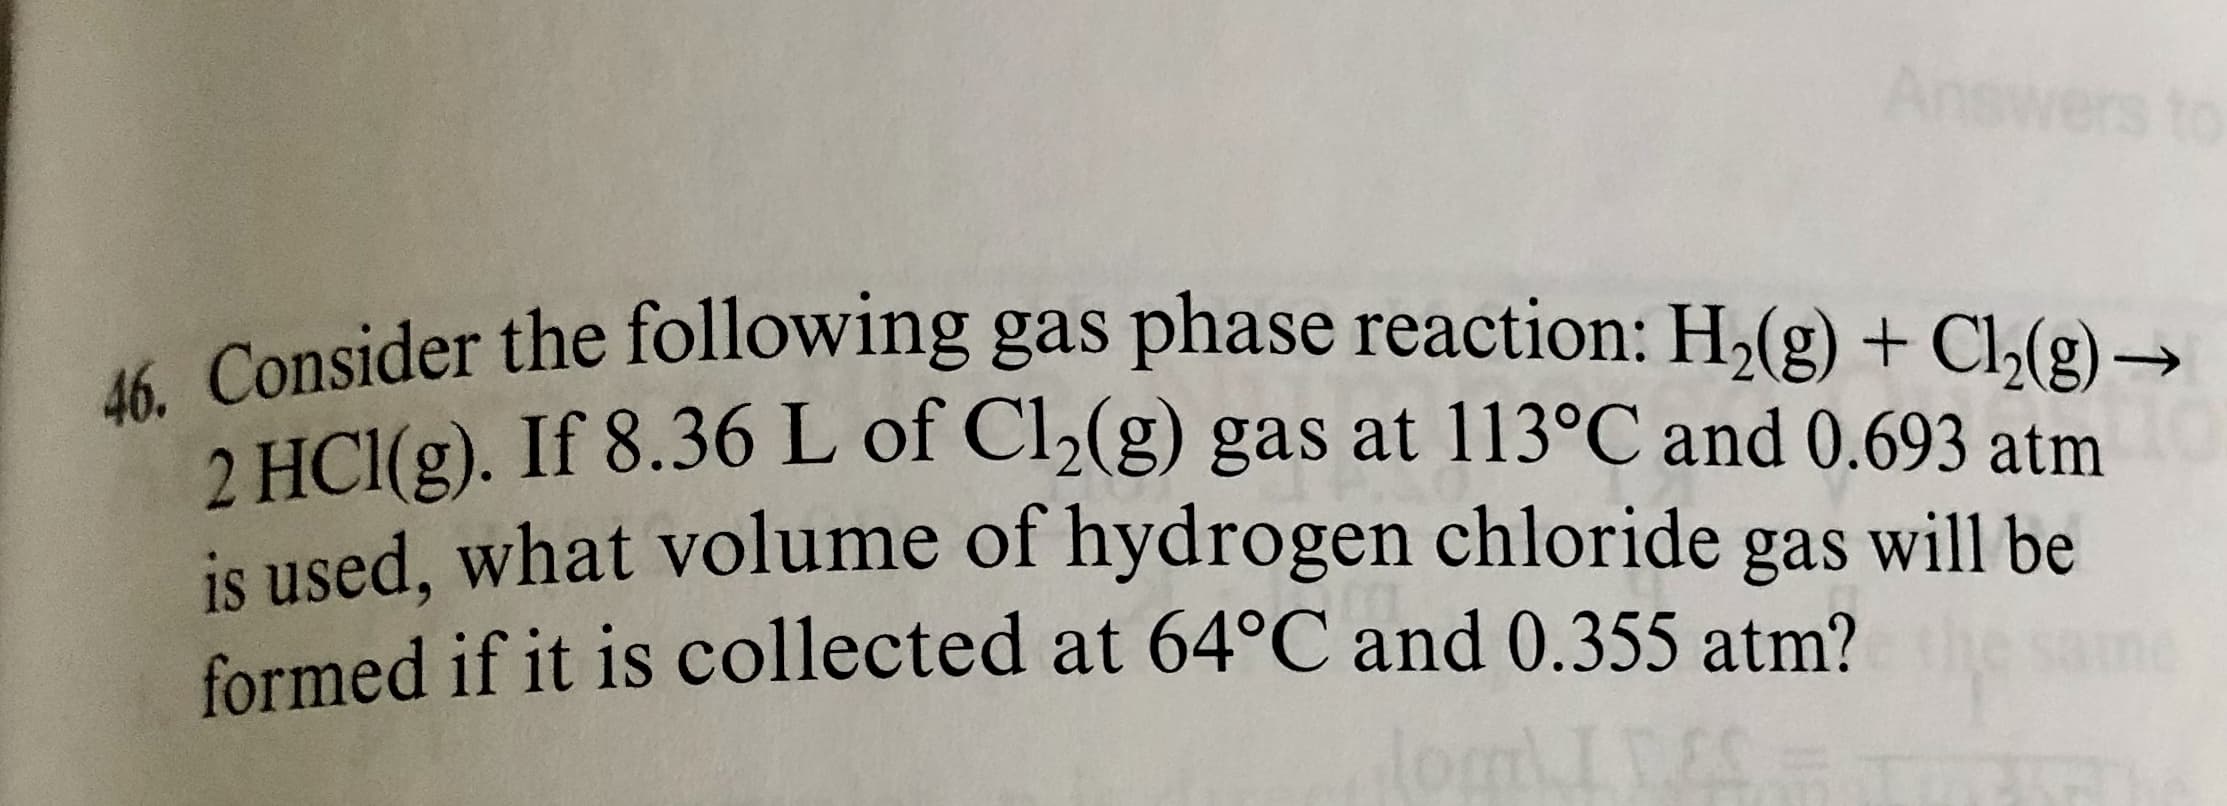 46. Consider the following gas phase reaction: H2(g) + Cl,(g) –
->
2 HCl(g). If 8.36 L of Cl2(g) gas at 113°C and 0.693 atm
is used, what volume of hydrogen chloride gas will be
formed if it is collected at 64°C and 0.355 atm?
ane
